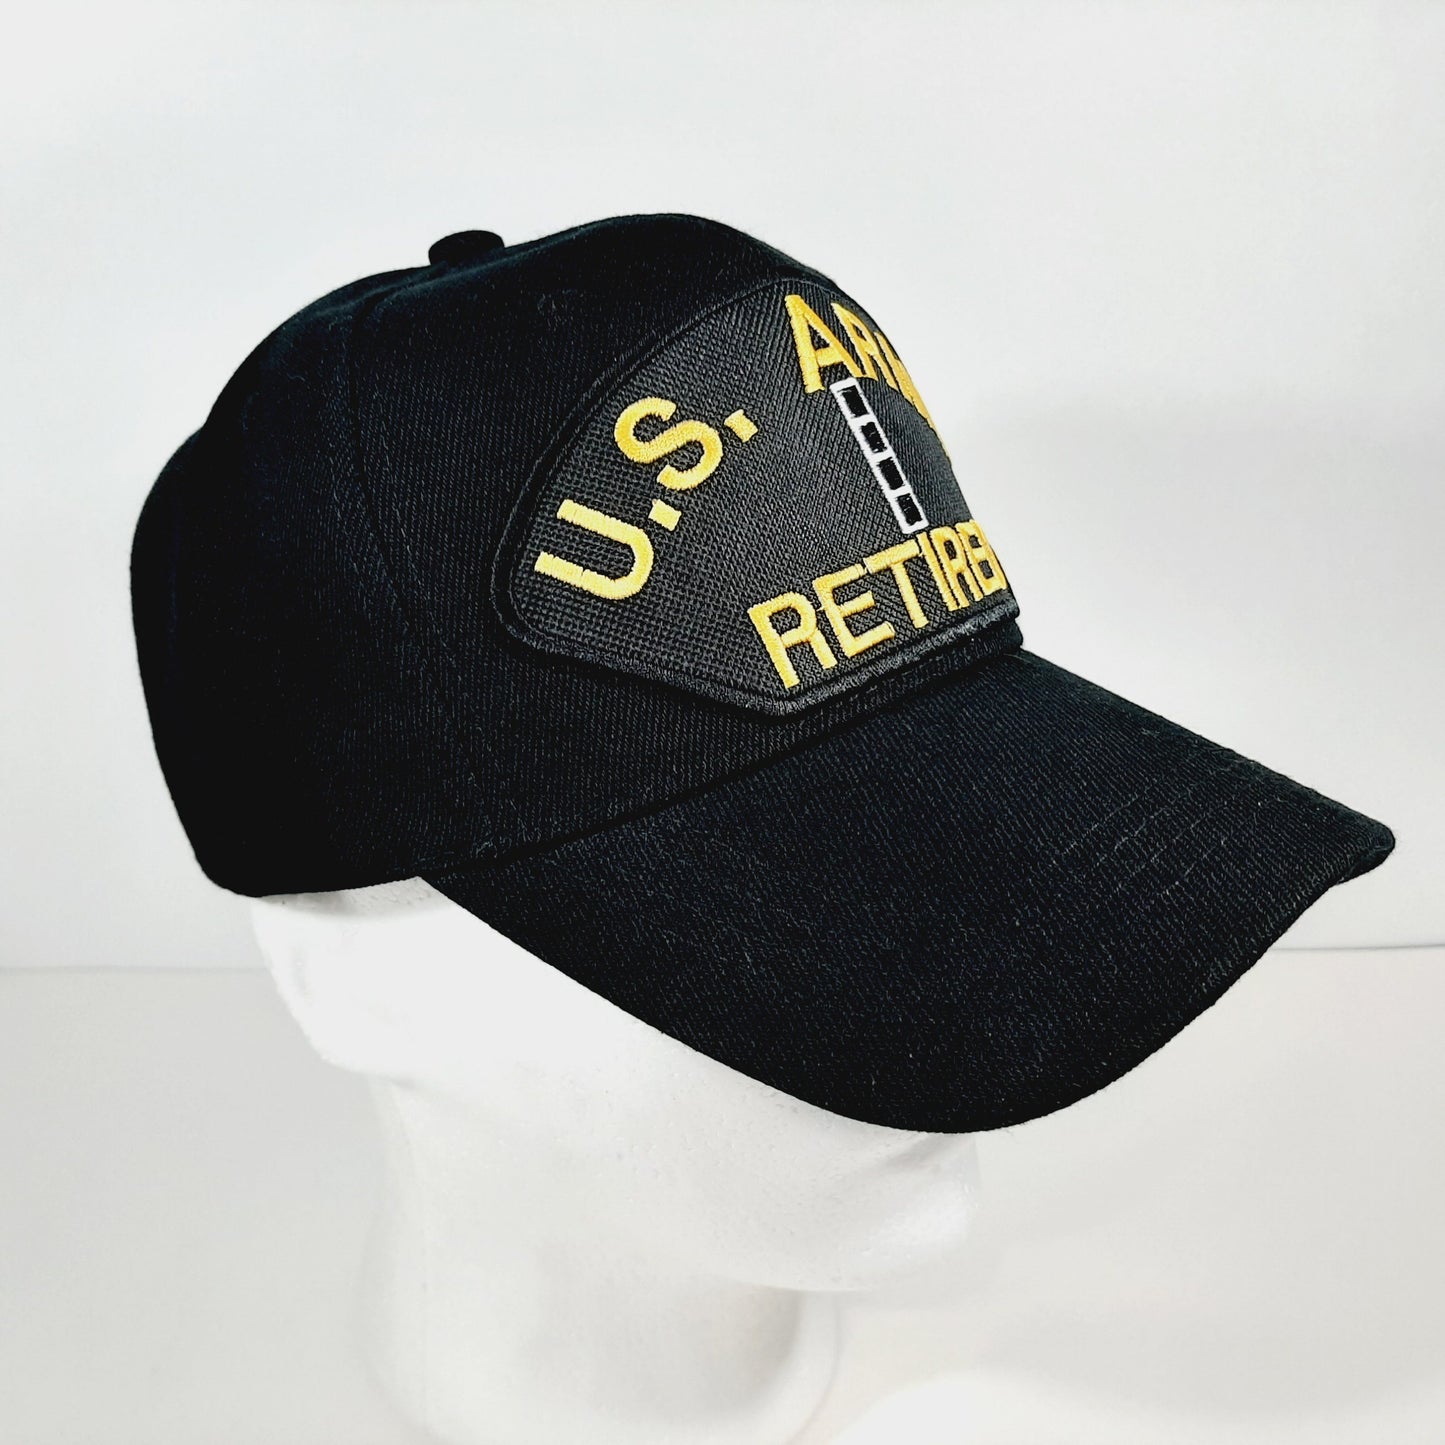 US ARMY CW4 Retired Mens Baseball Cap Hat Black Embroidered Patch Veteran